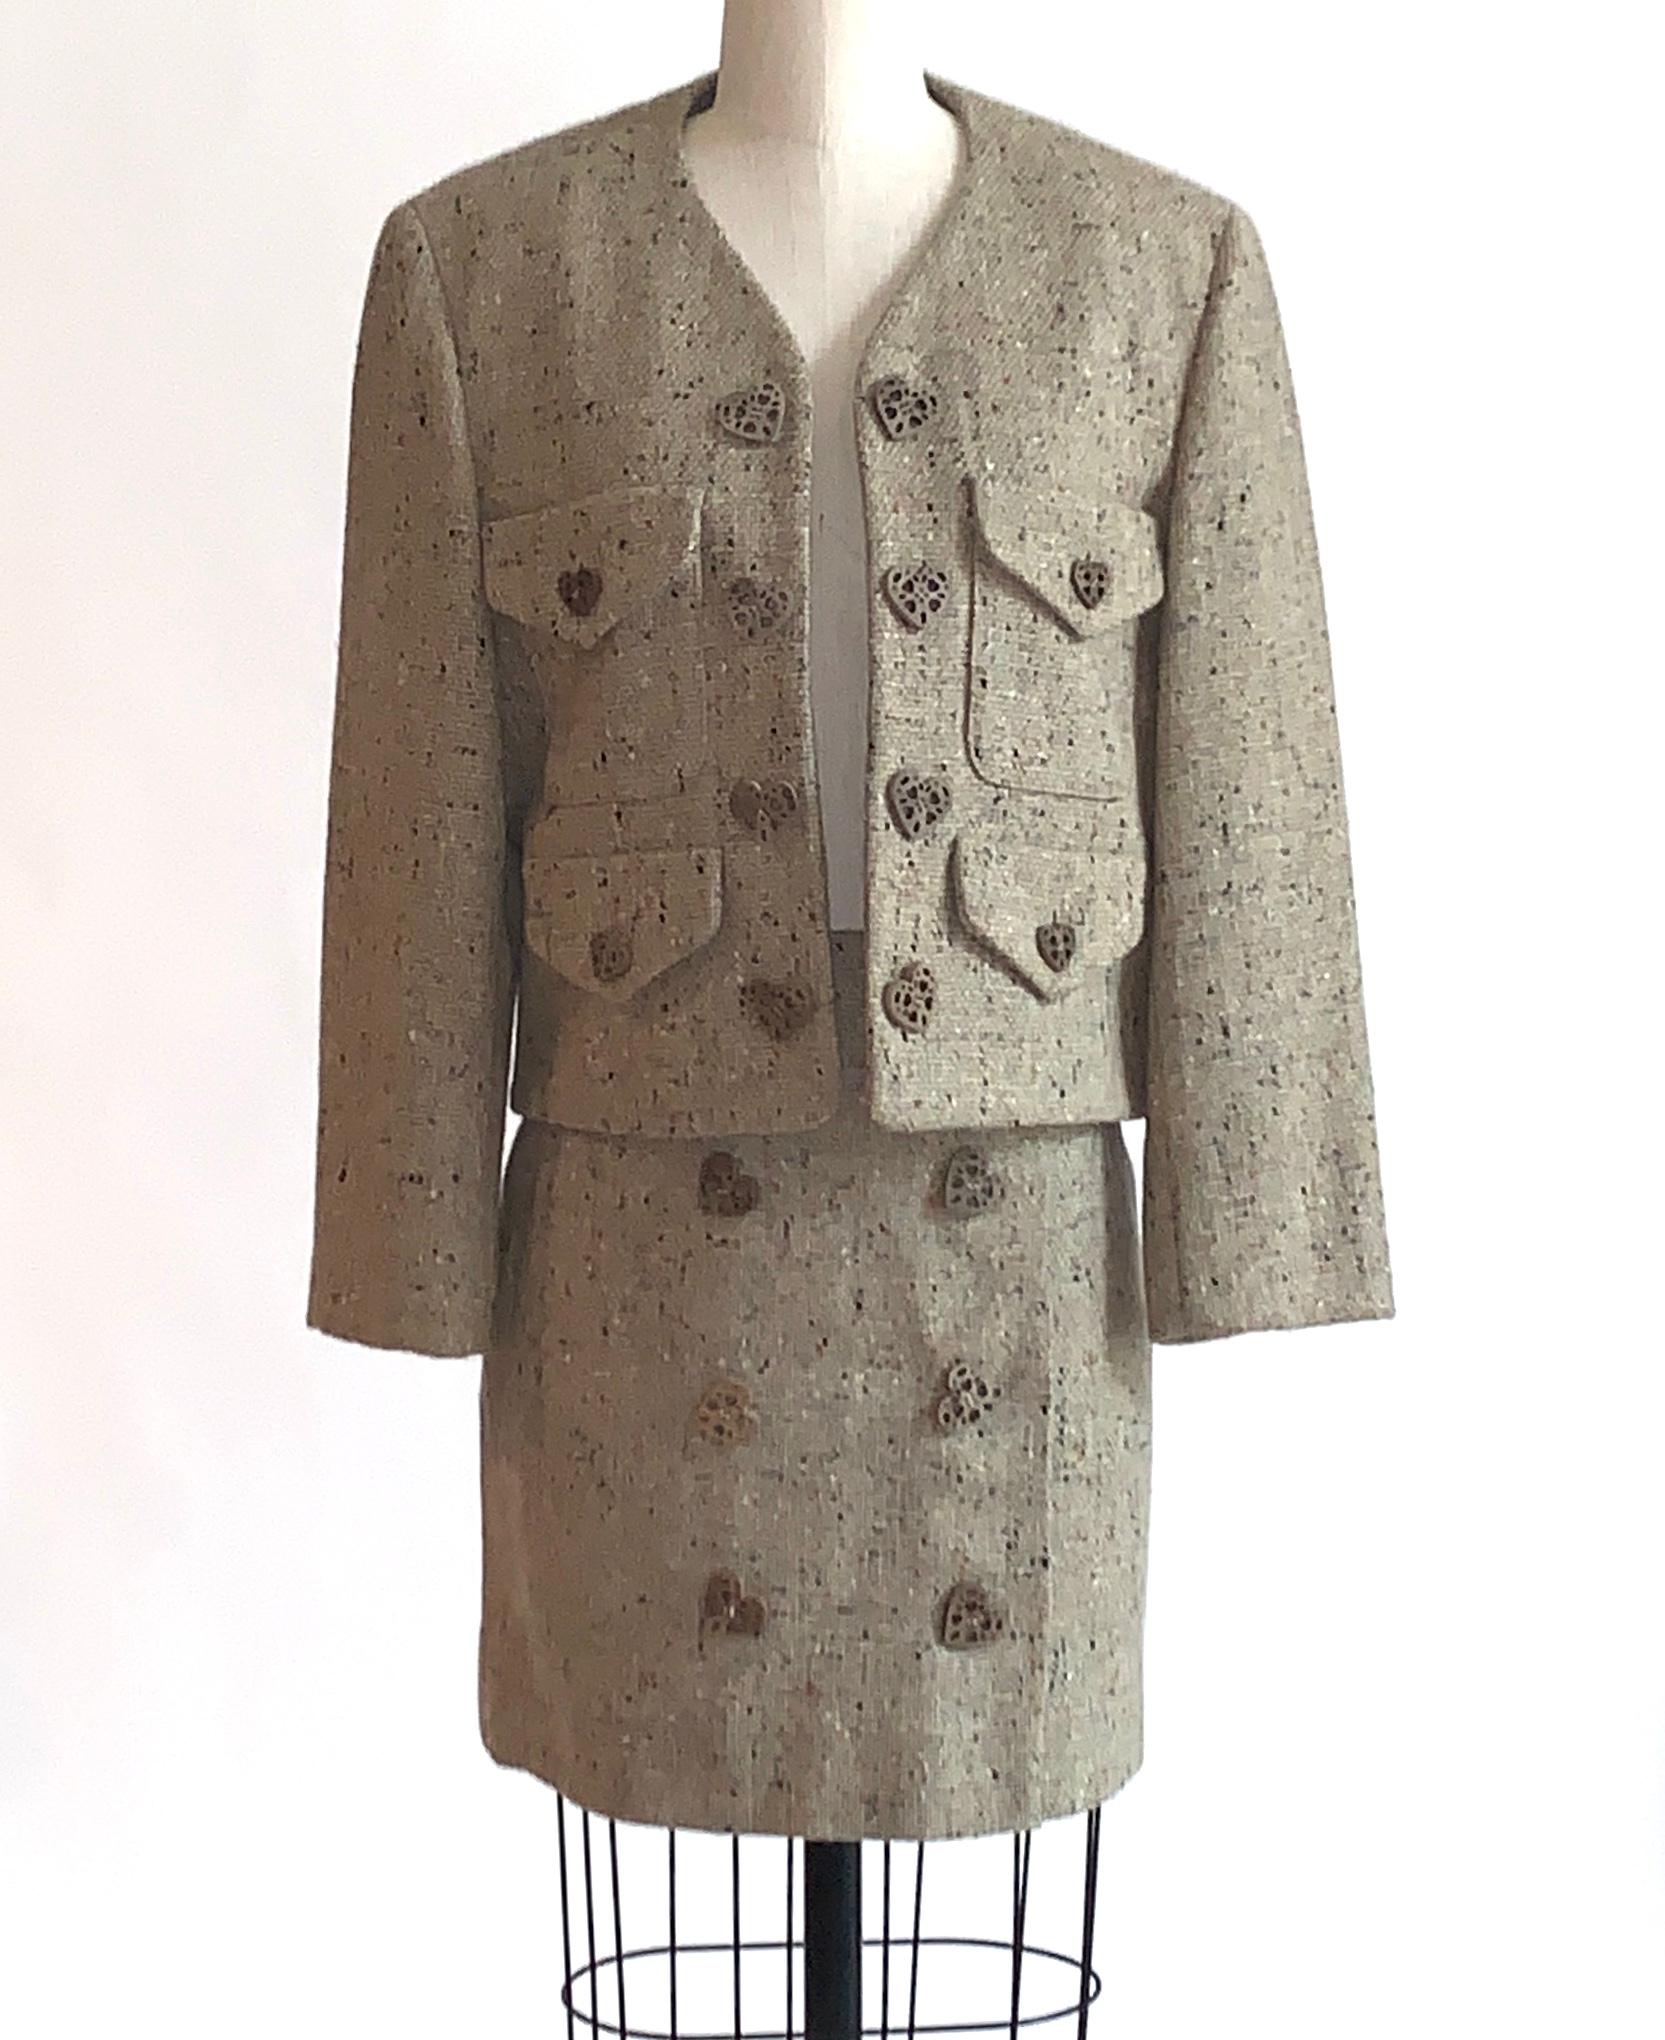 Vintage Moschino Cheap & Chic 1990s skirt suit in oatmeal tweed, speckled with flecks of orange, charcoal, and a very subtle pale lime. Open front jacket features front pockets with flaps and wooden heart buttons. Light padding at shoulders. Wrap